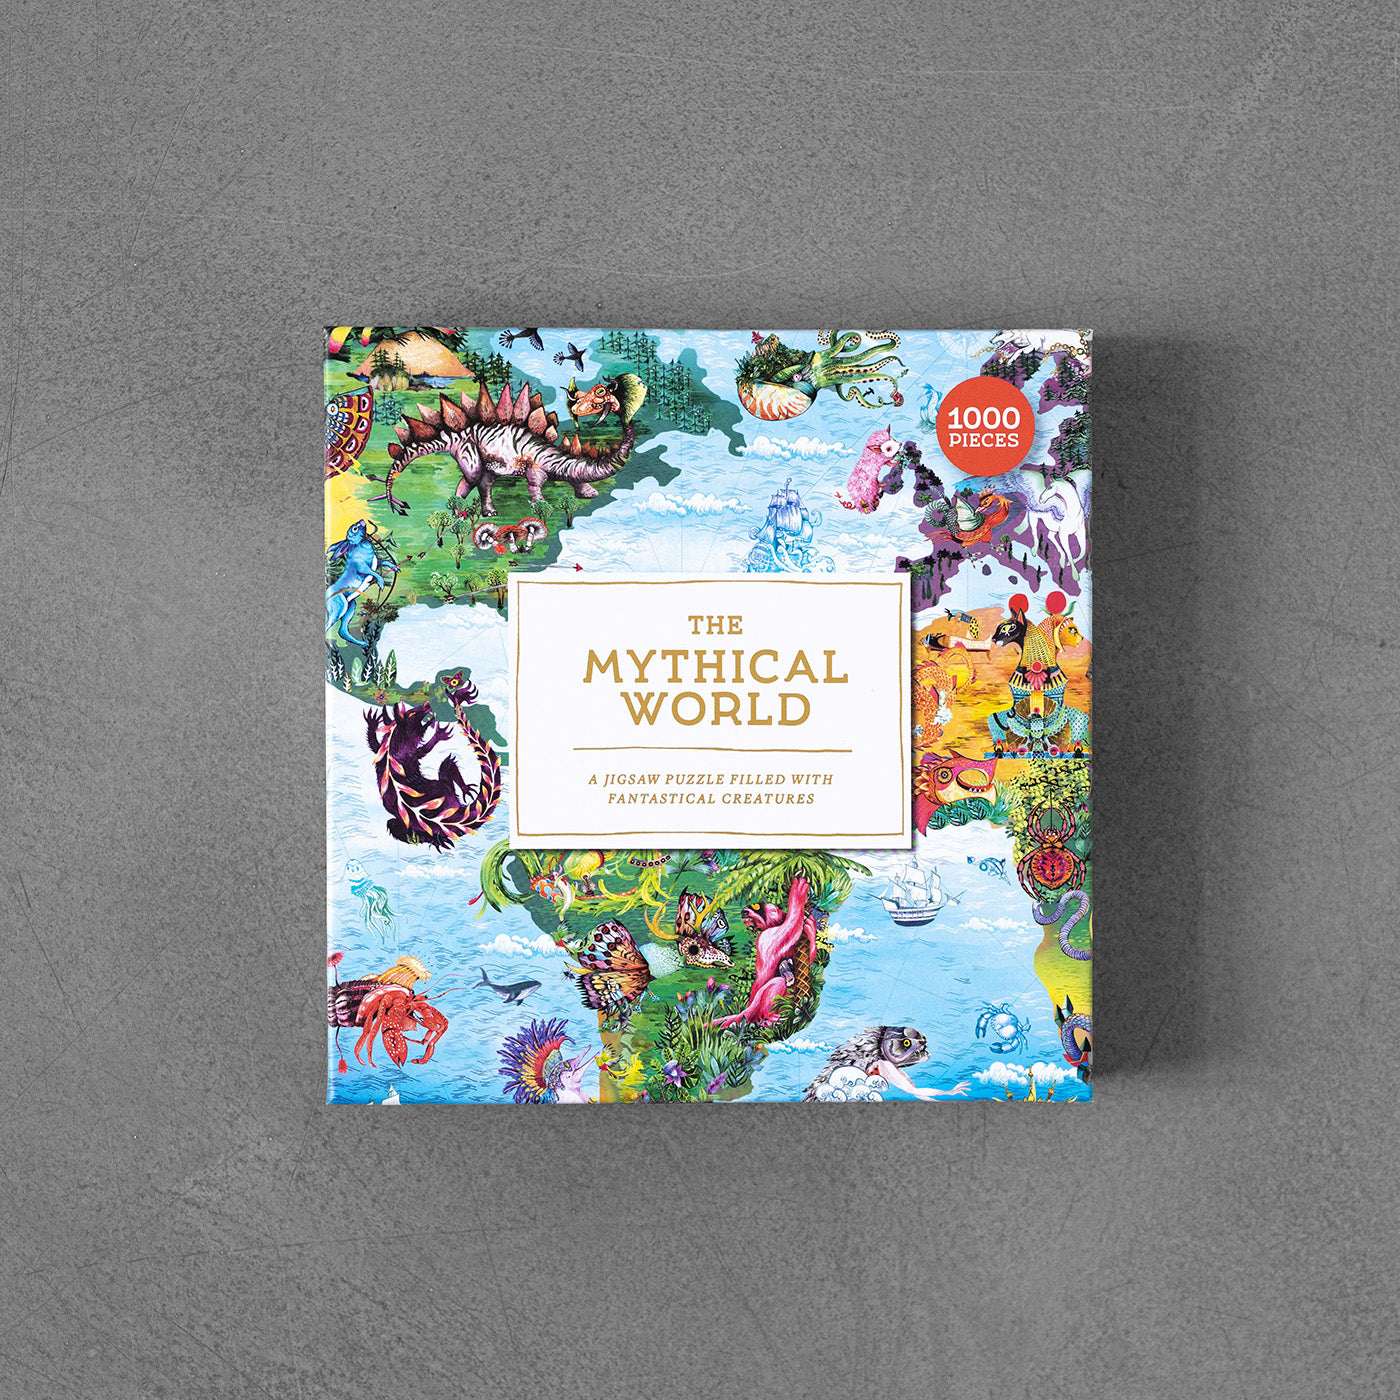 Mythical World: A Jigsaw Puzzle Filled with Fantastical Creatures